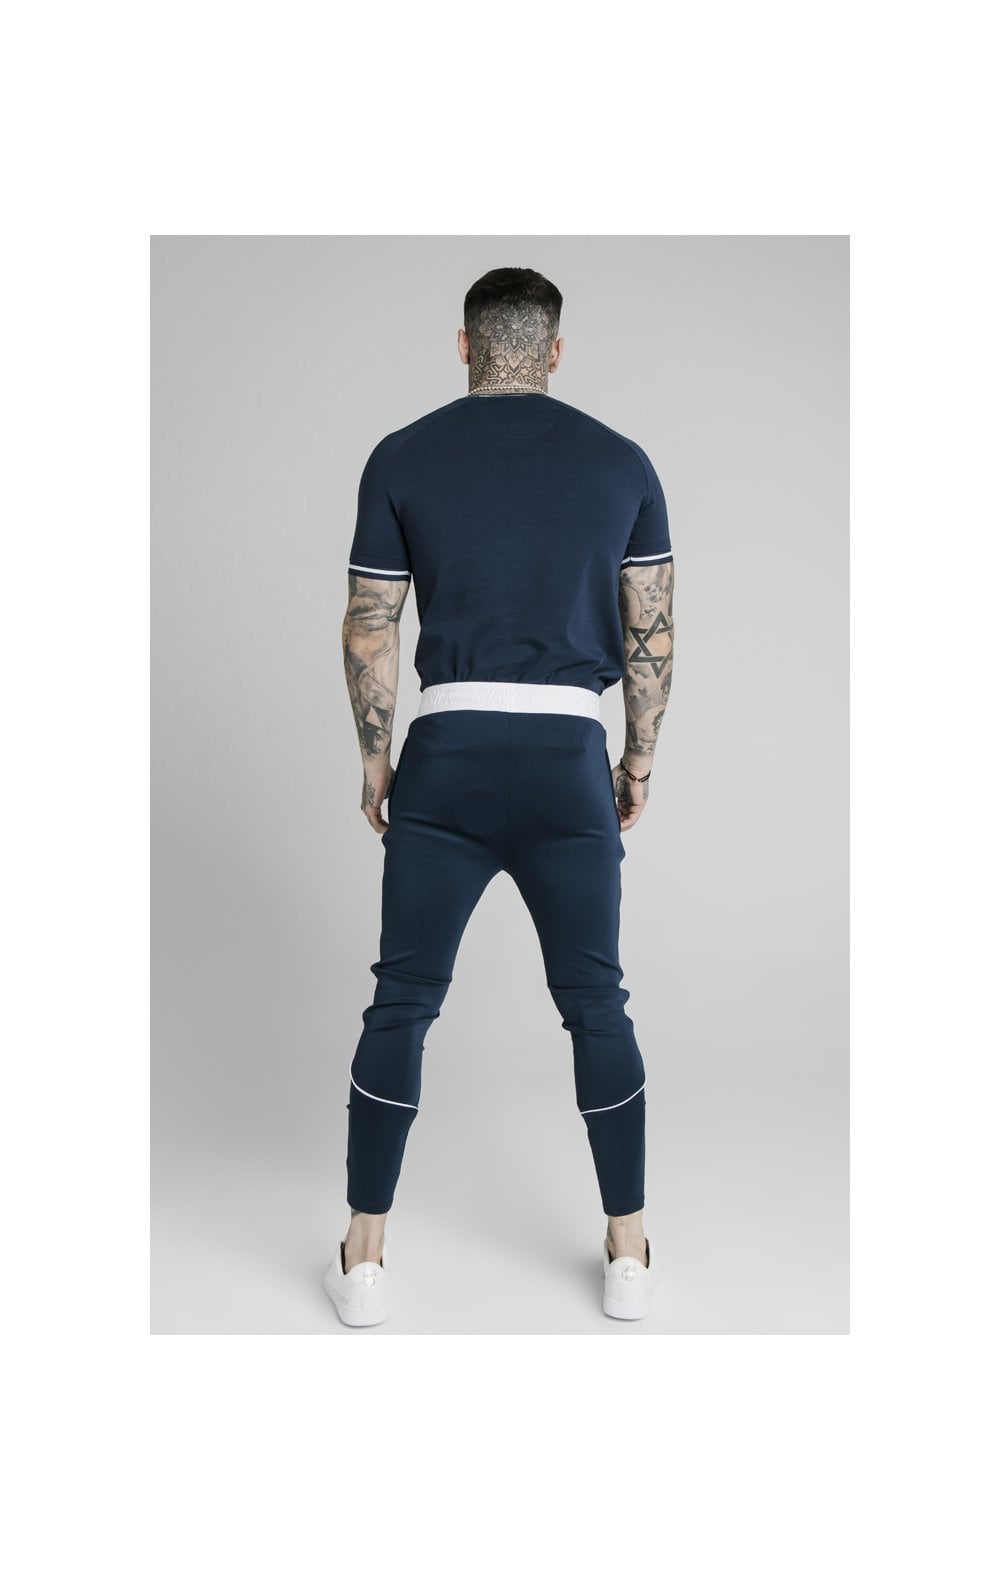 Load image into Gallery viewer, SikSilk Athlete Prestige Fade Track Pants - Navy (6)